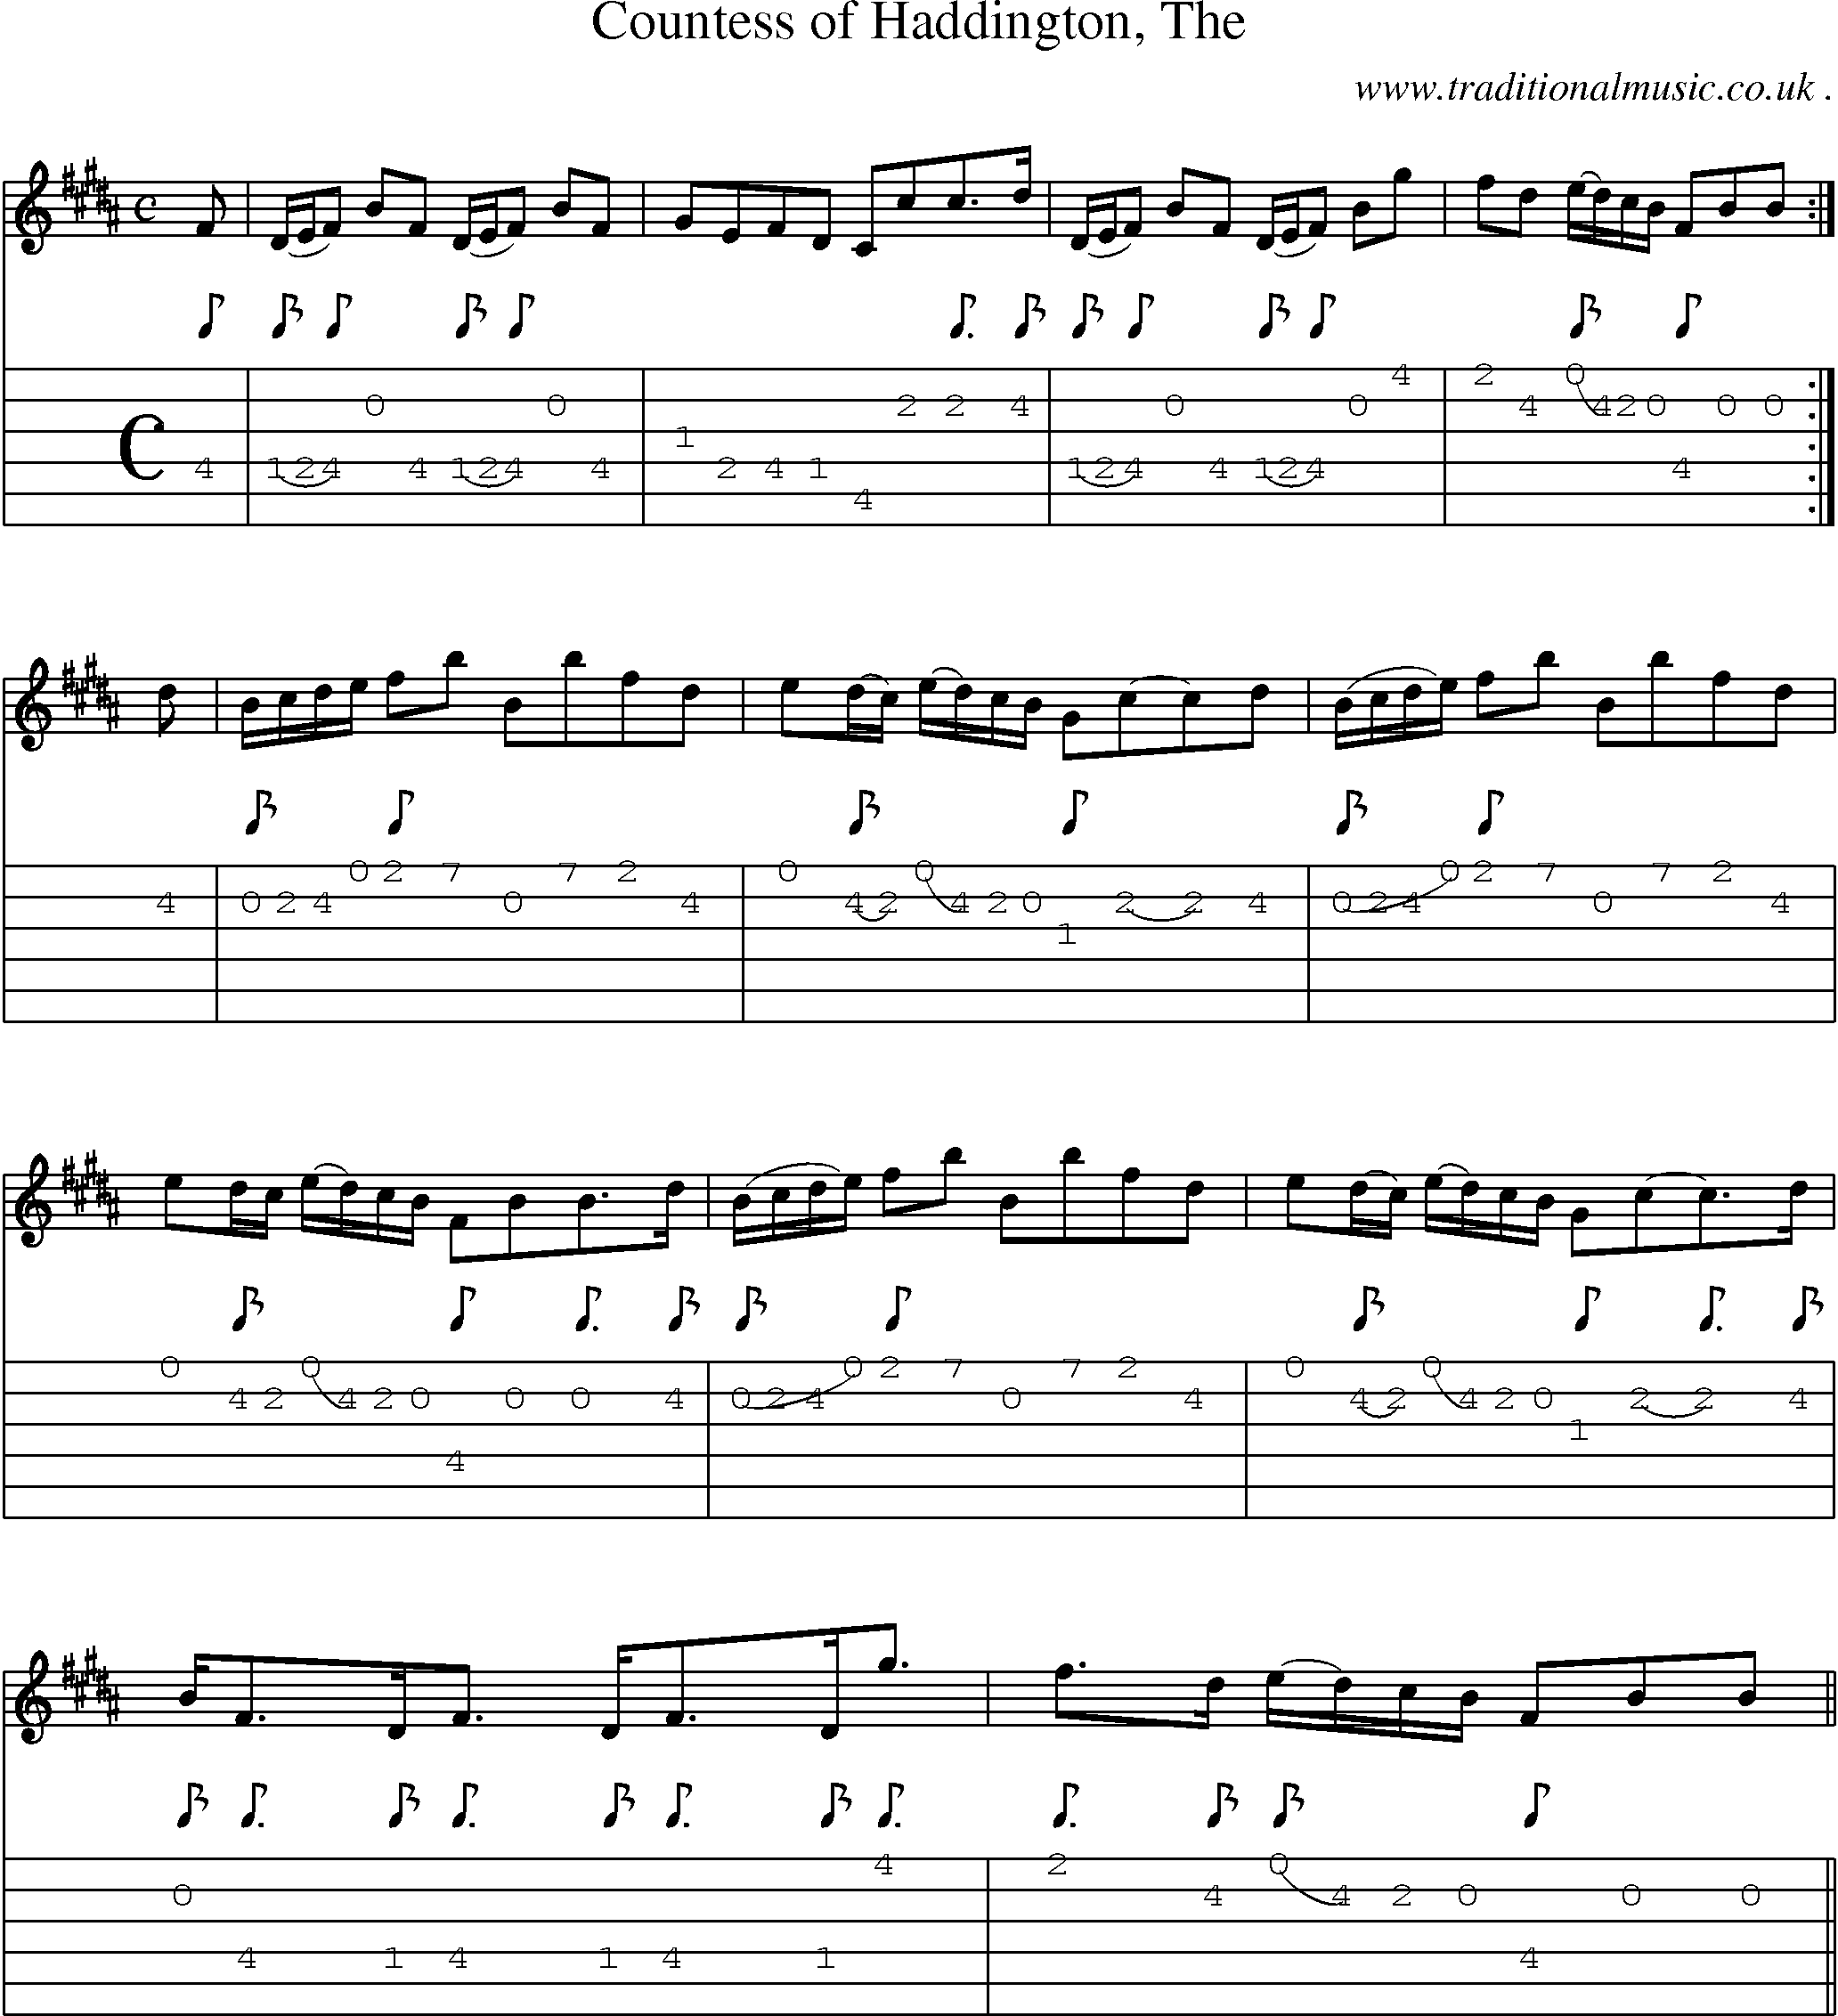 Sheet-music  score, Chords and Guitar Tabs for Countess Of Haddington The